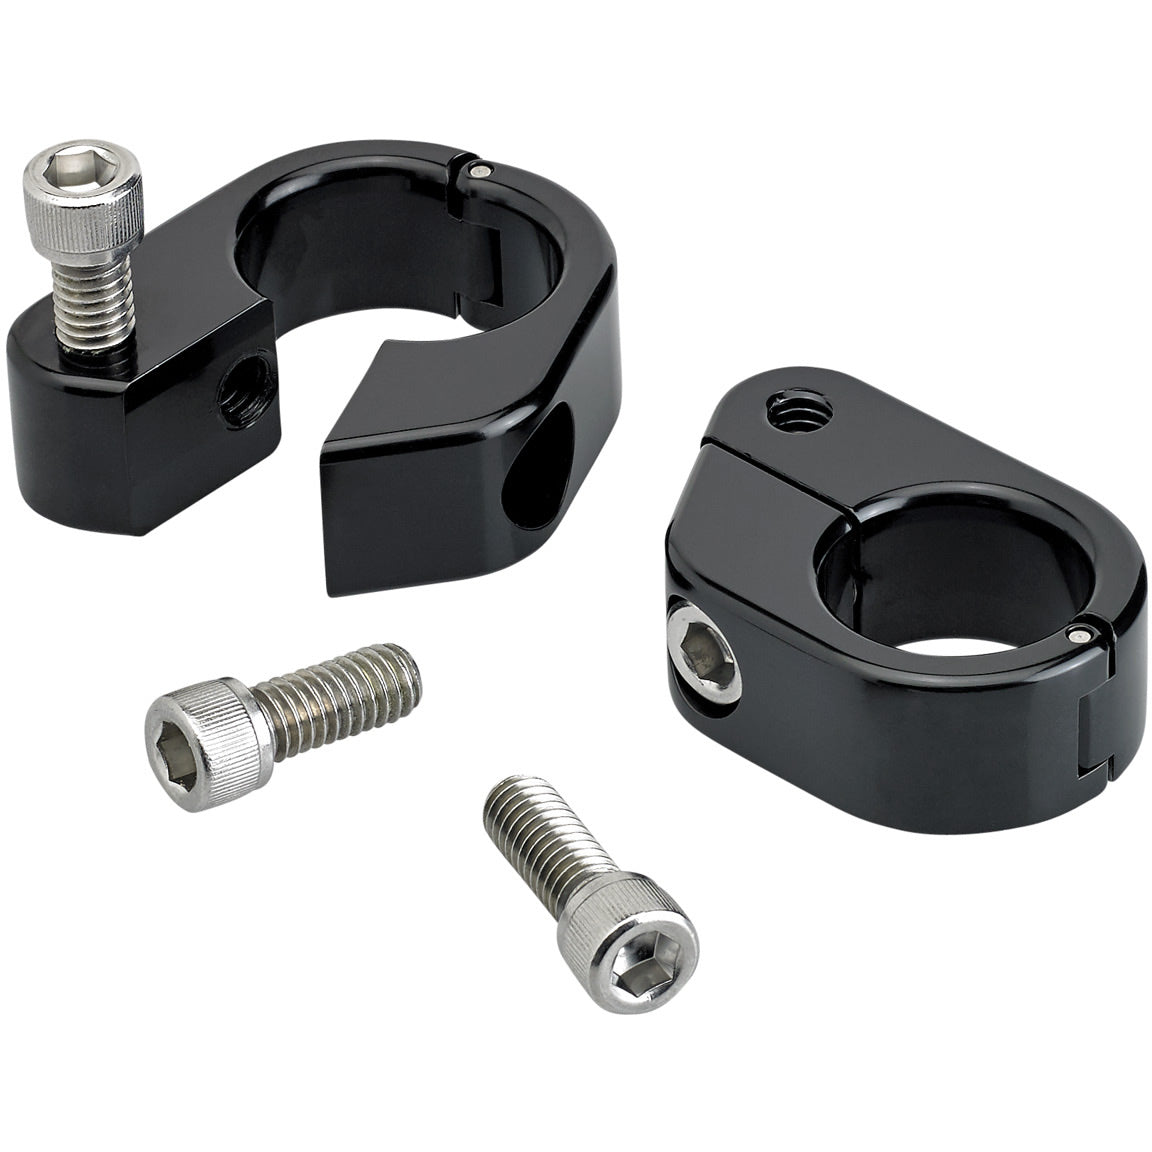 CLOSEOUT Speed Clamps - Black